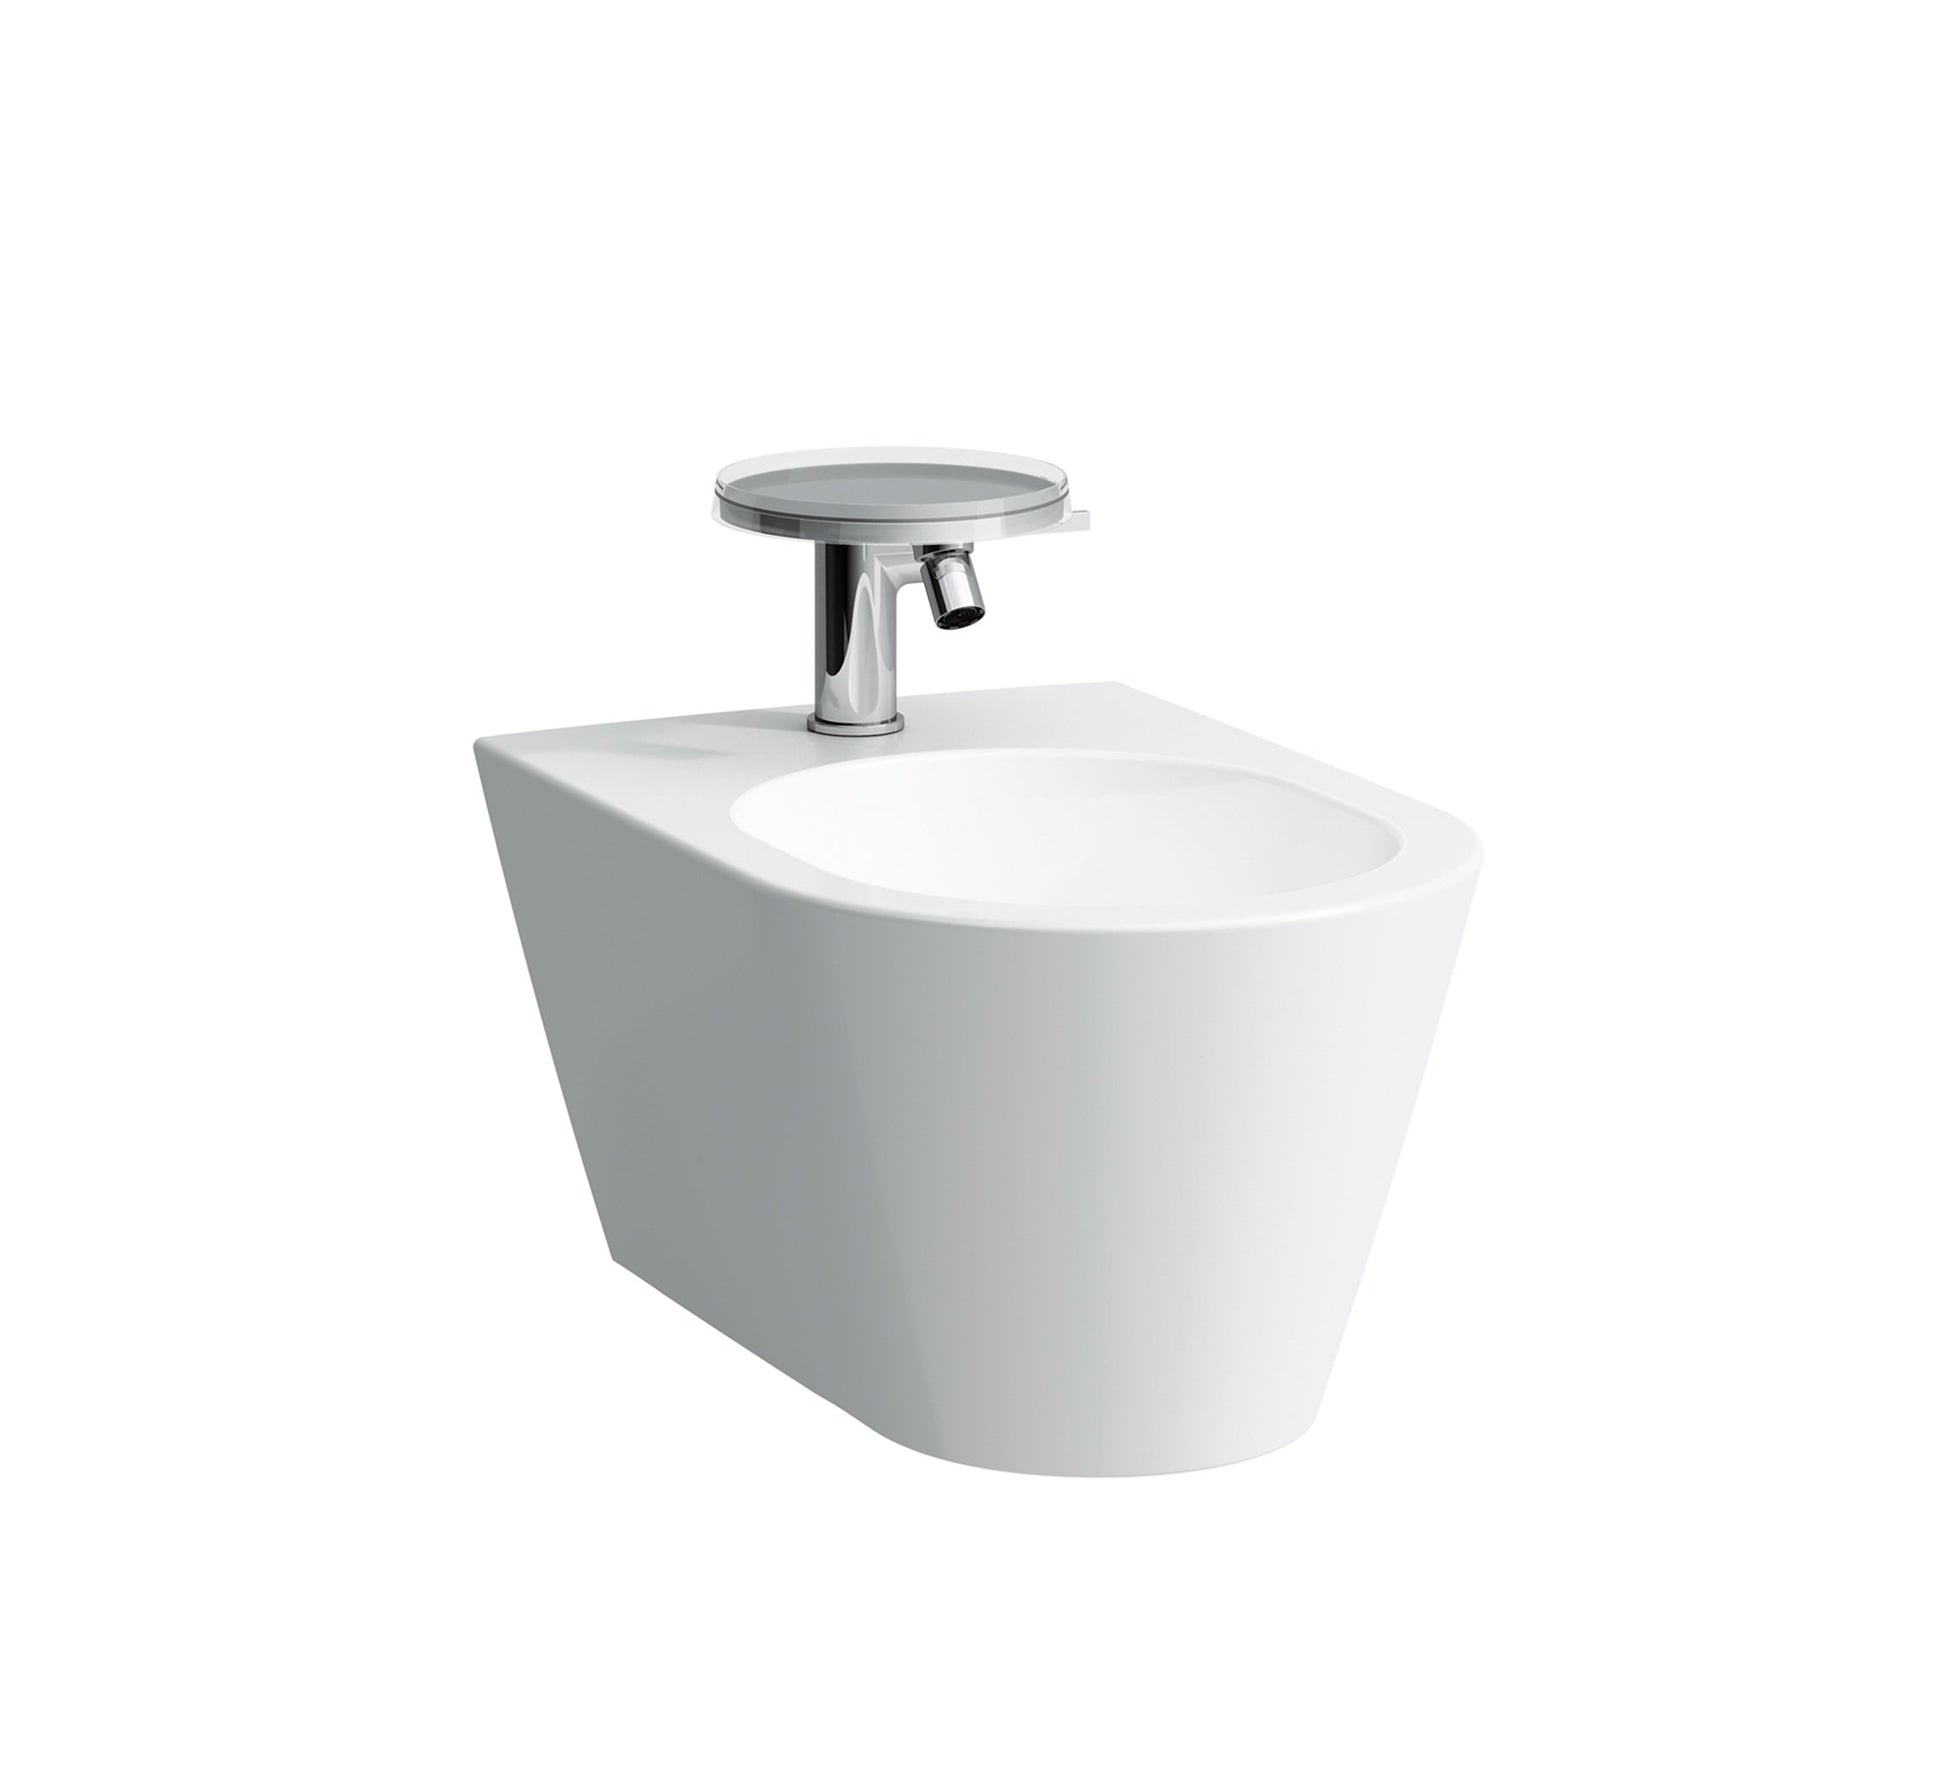 LAUFEN KARTELL BIDET, WALL HUNG WITH CONCEALED OVERFLOW SYSTEM, INCLUDING CHROME WASTE COVER WHITE - 8.3033.1.000.302.1 - Tadmur Trading